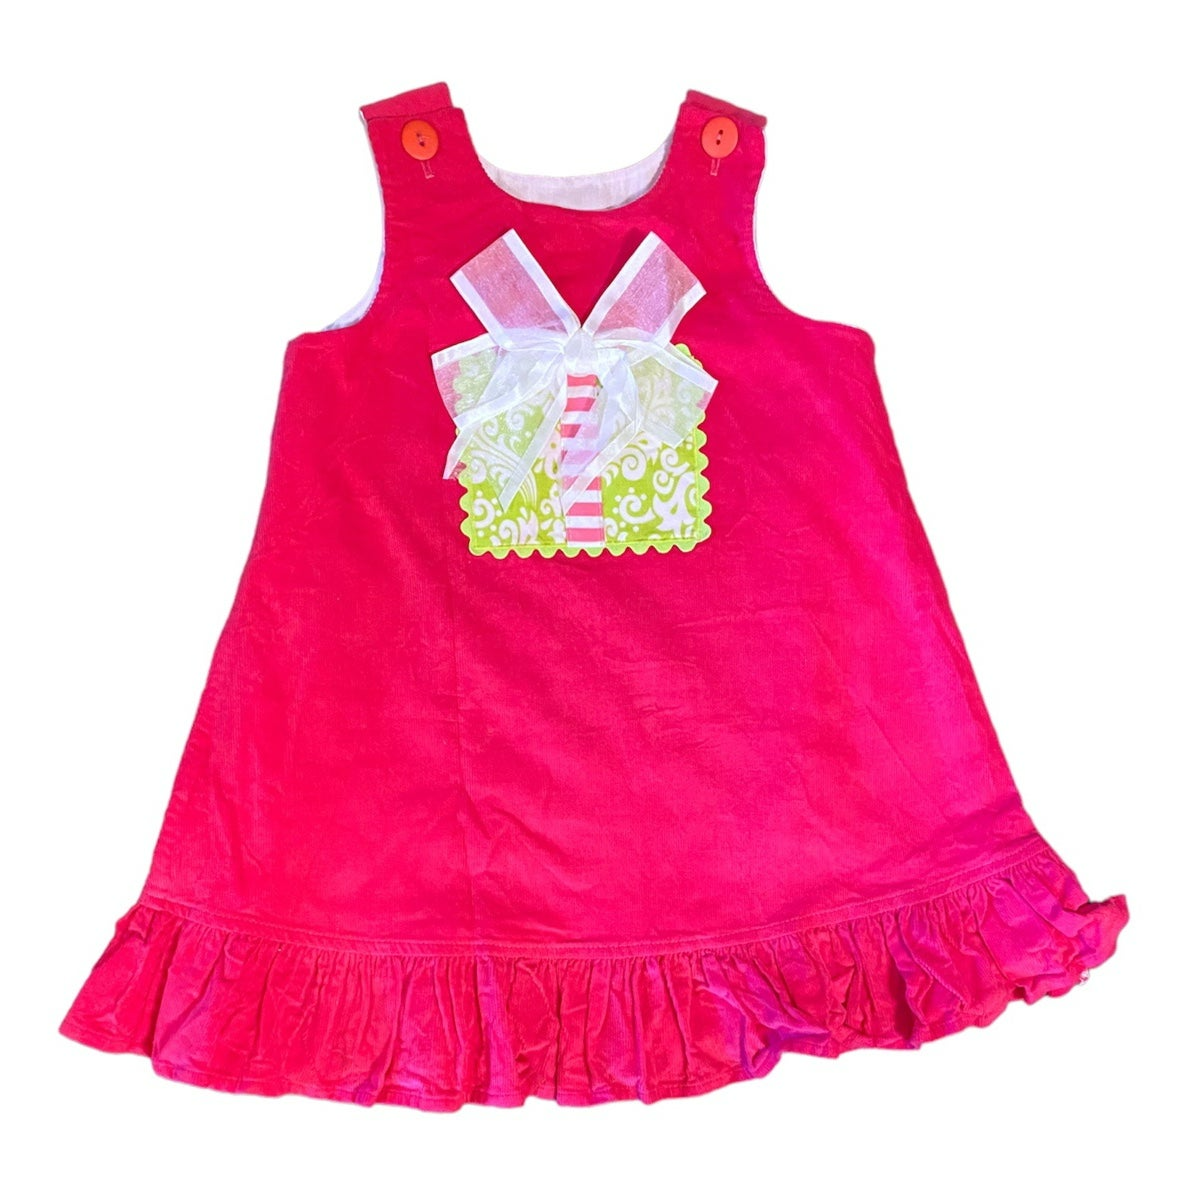 New 2T hot pink Christmas or birthday dress